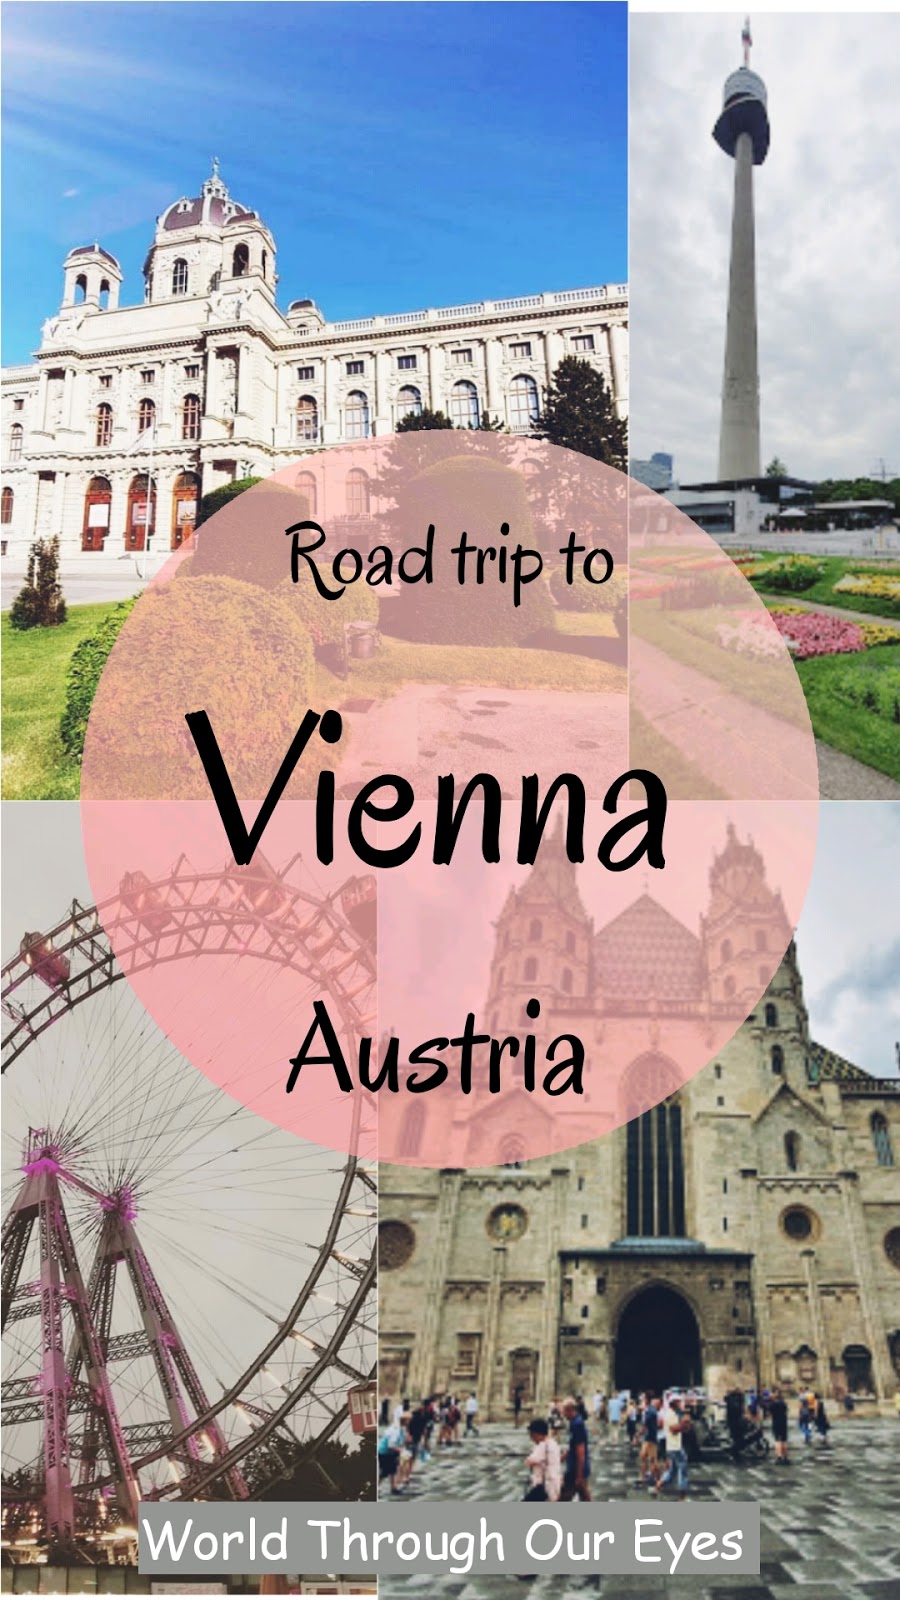 World Through Our Eyes: It is time for road trip - VIENNA